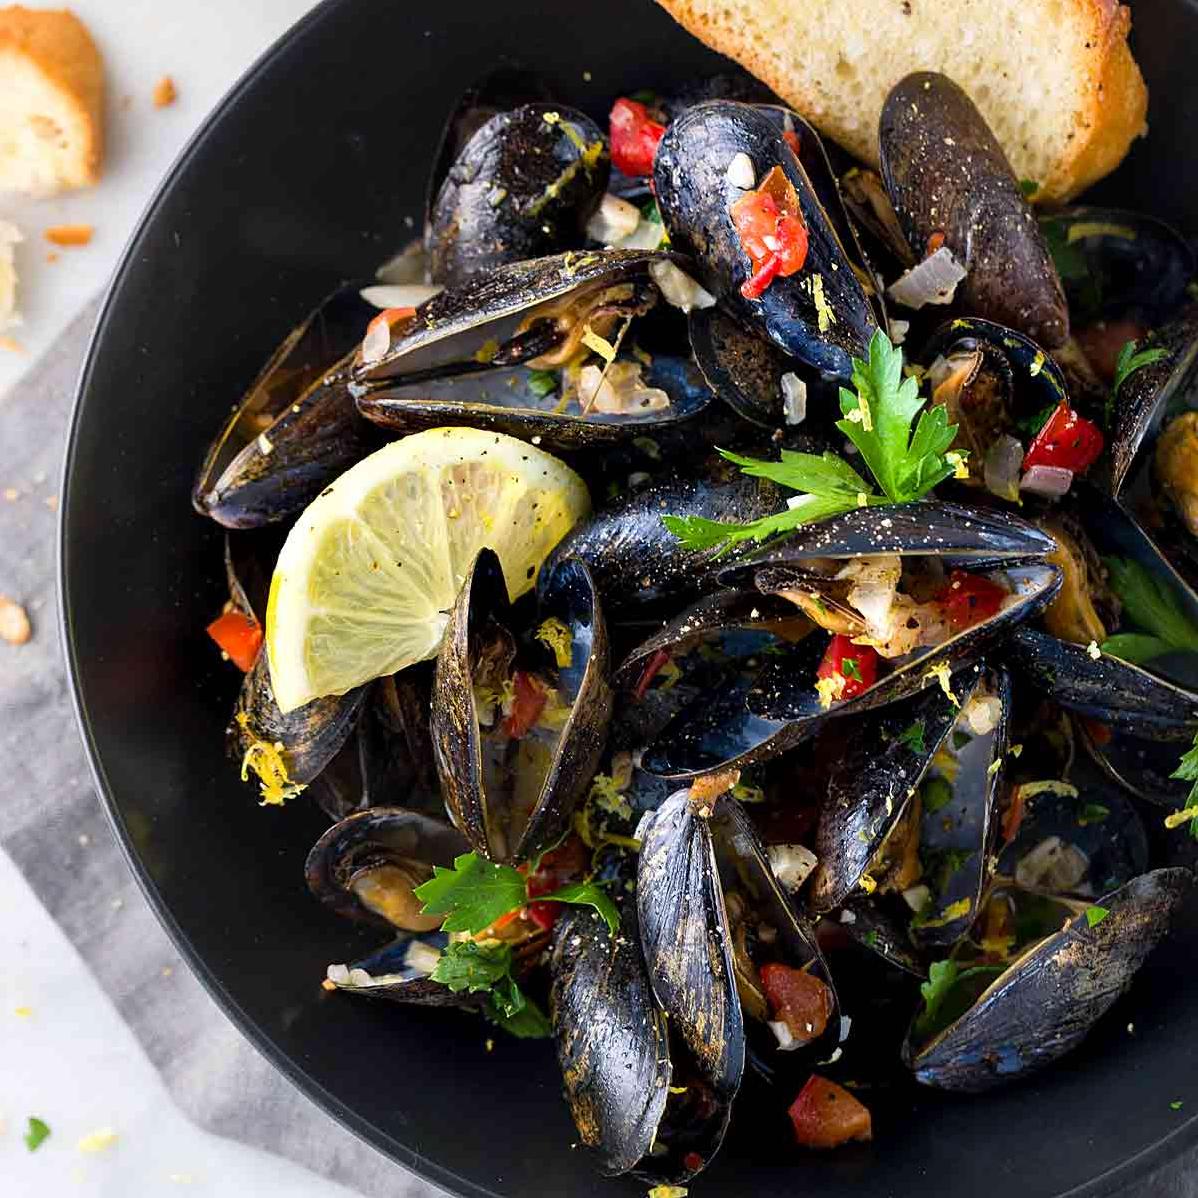  A steamy and aromatic bowl of fresh mussels in wine sauce